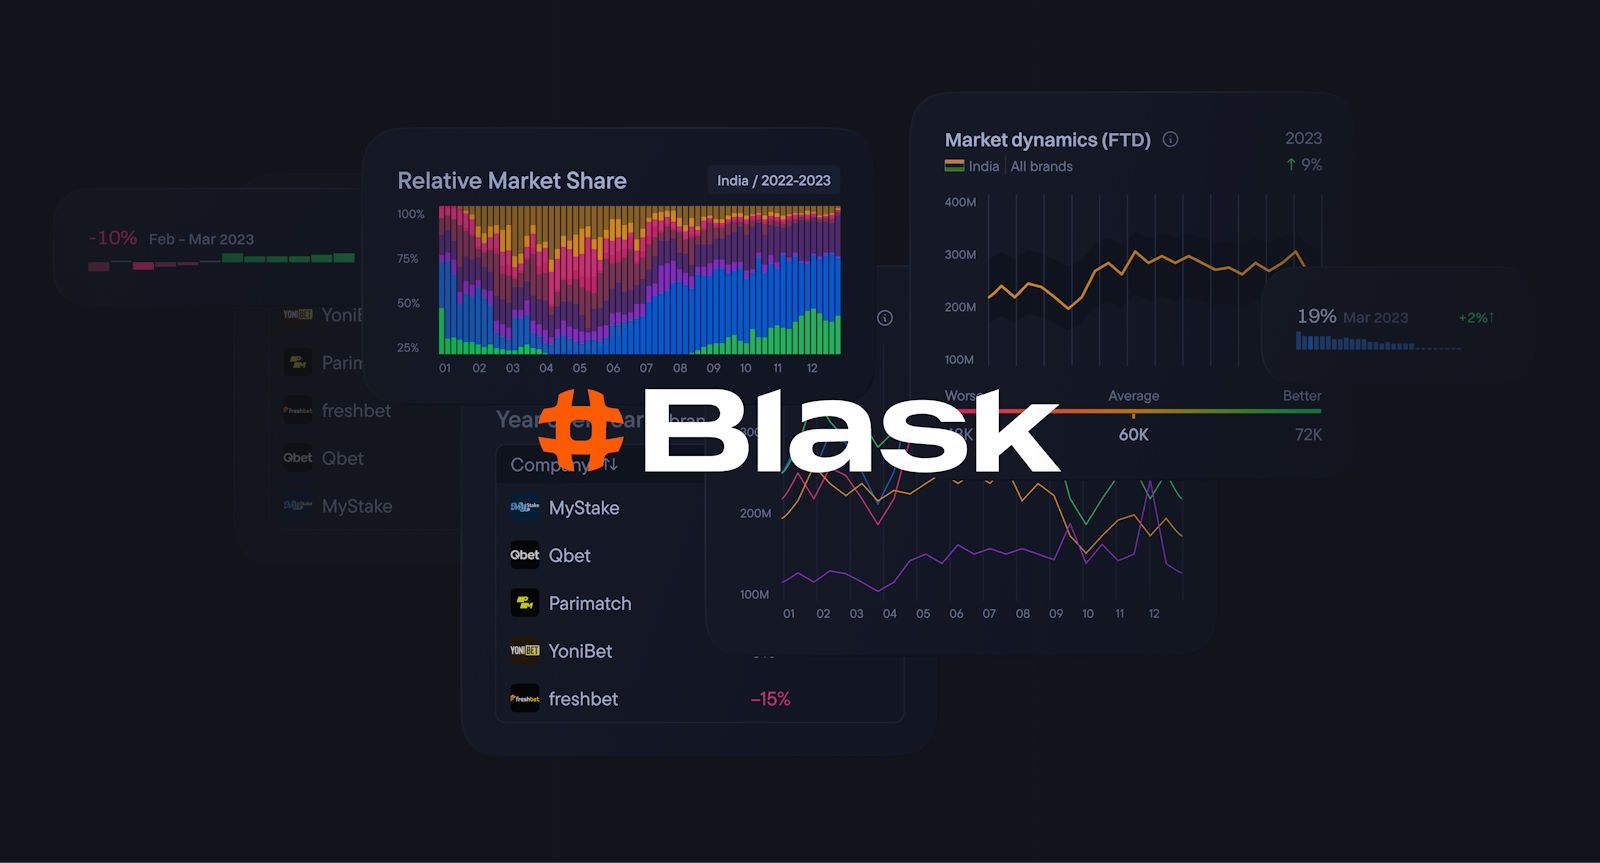 What is Blask and how to use it to navigate through iGaming industry